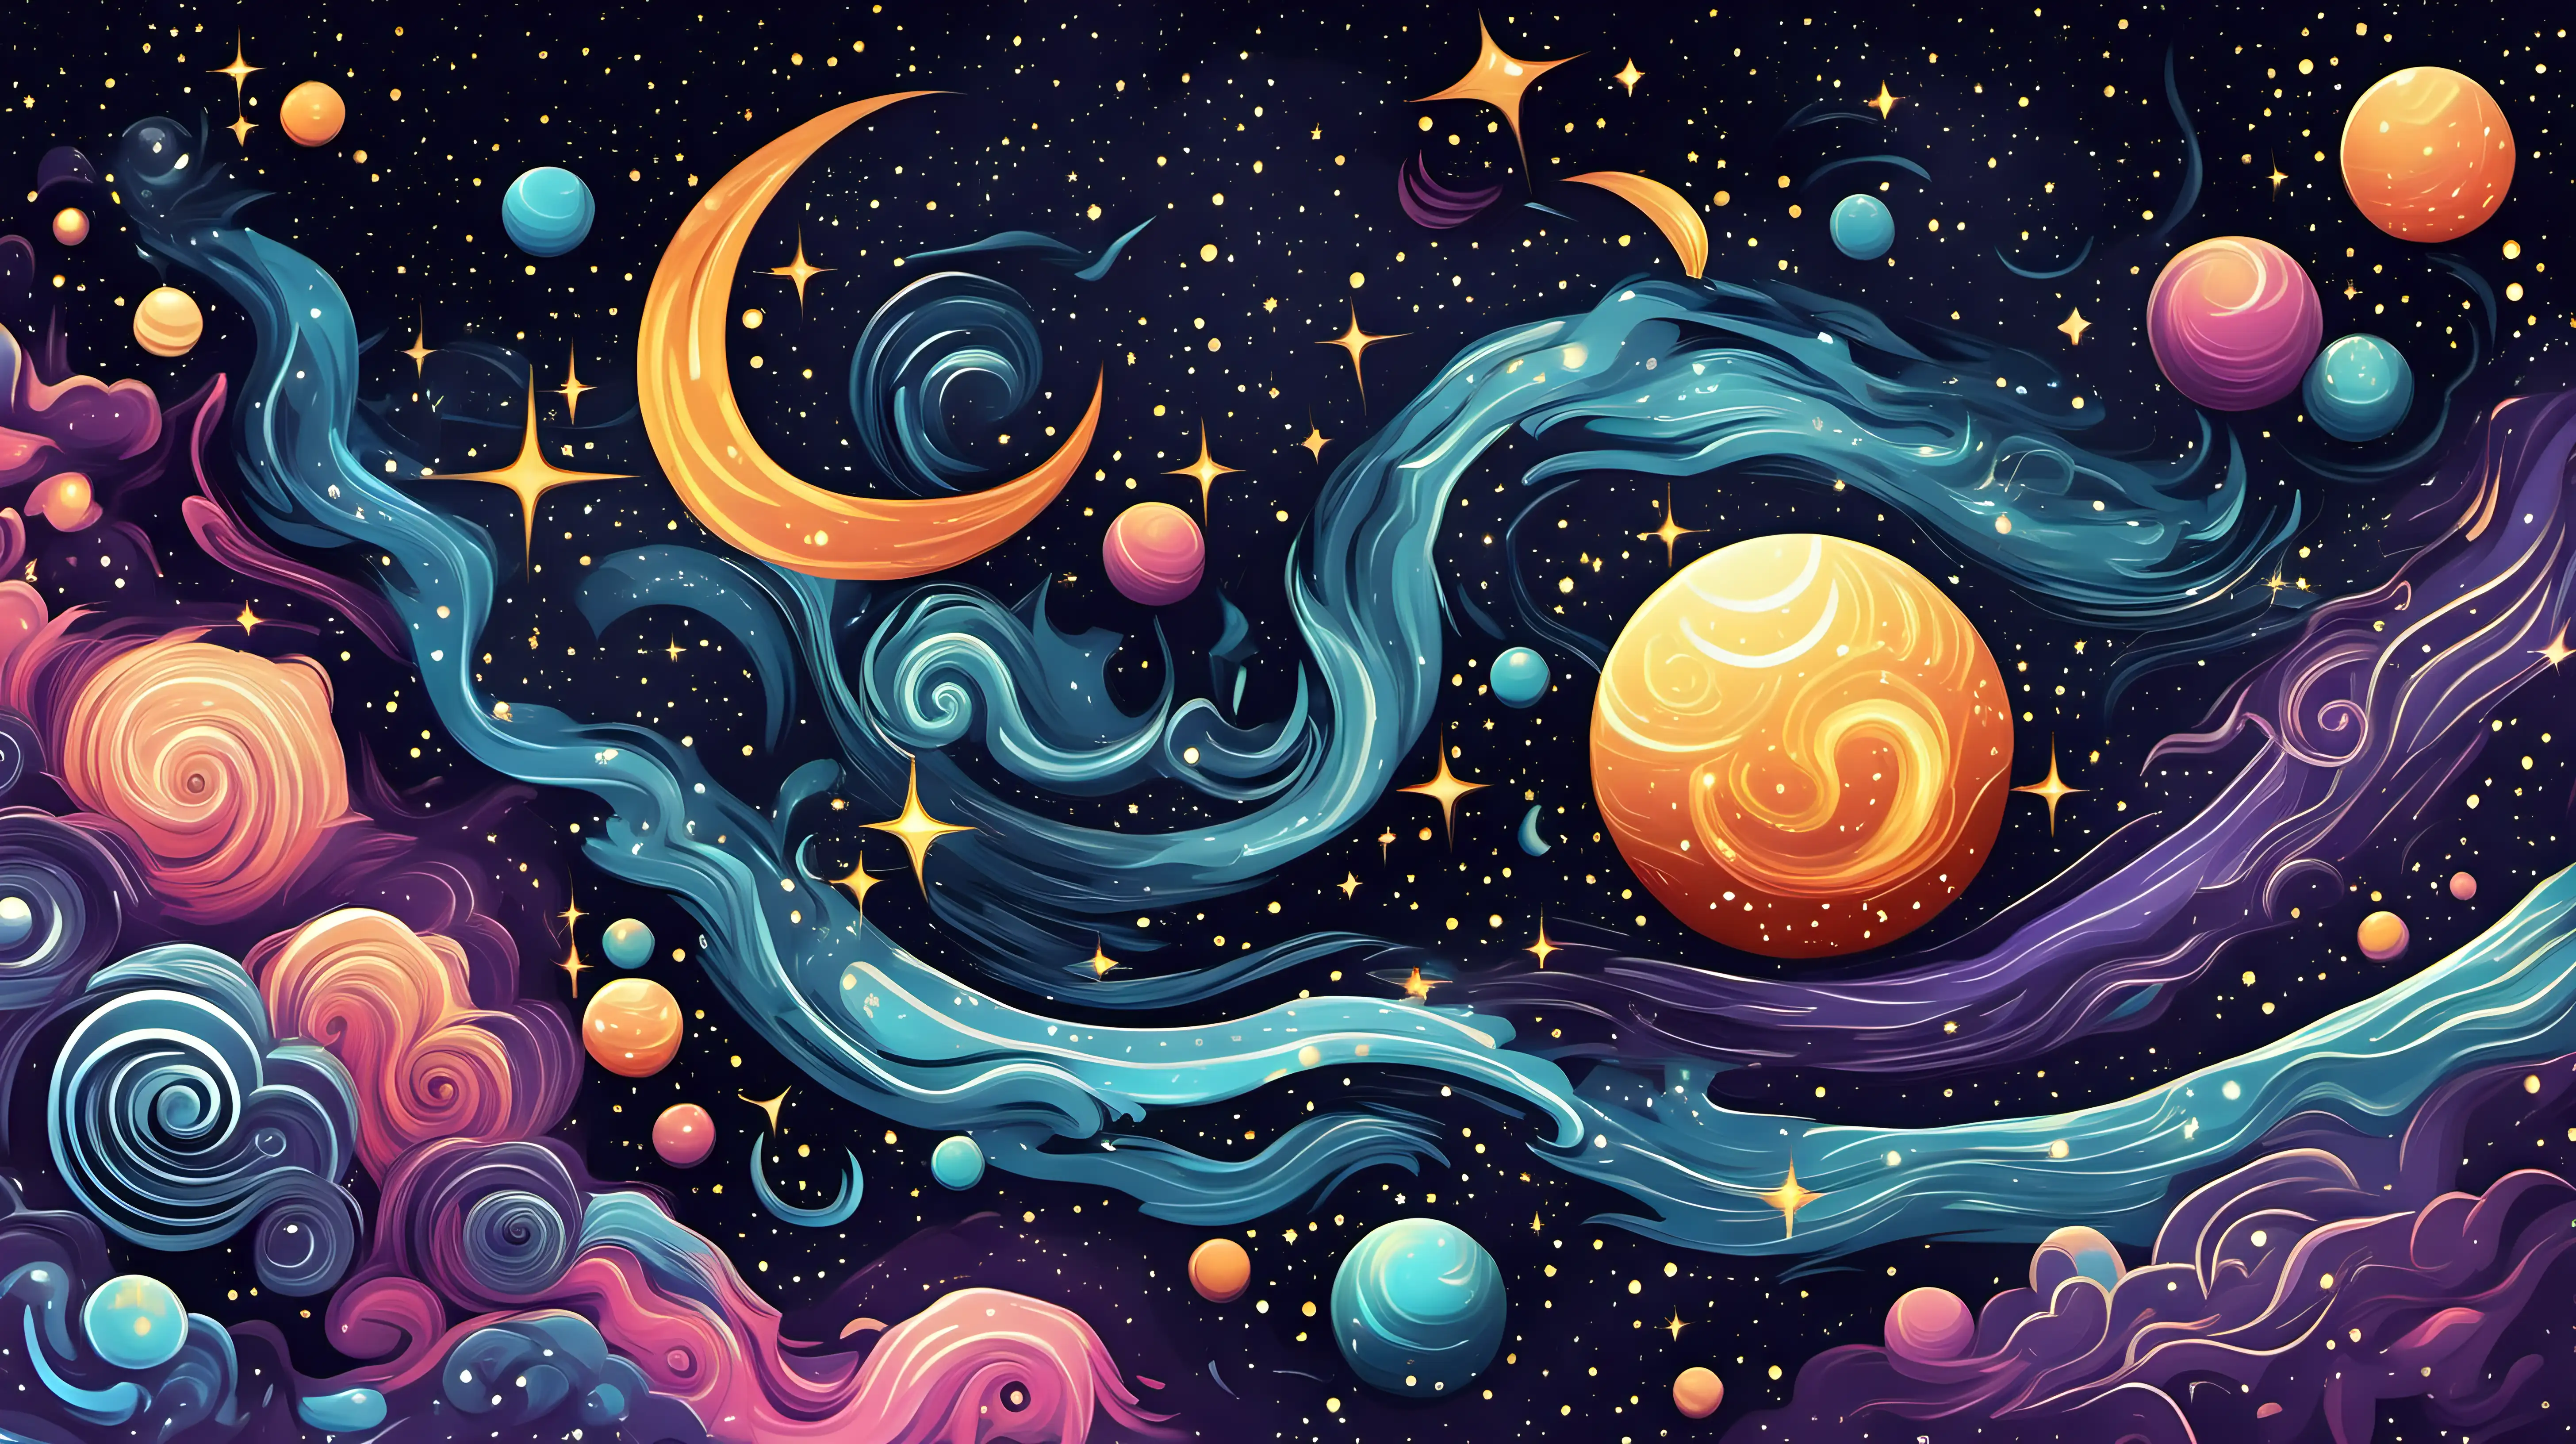 Craft an abstract background inspired by celestial bodies and cosmic phenomena, incorporating swirling galaxies, stars, and cosmic dust